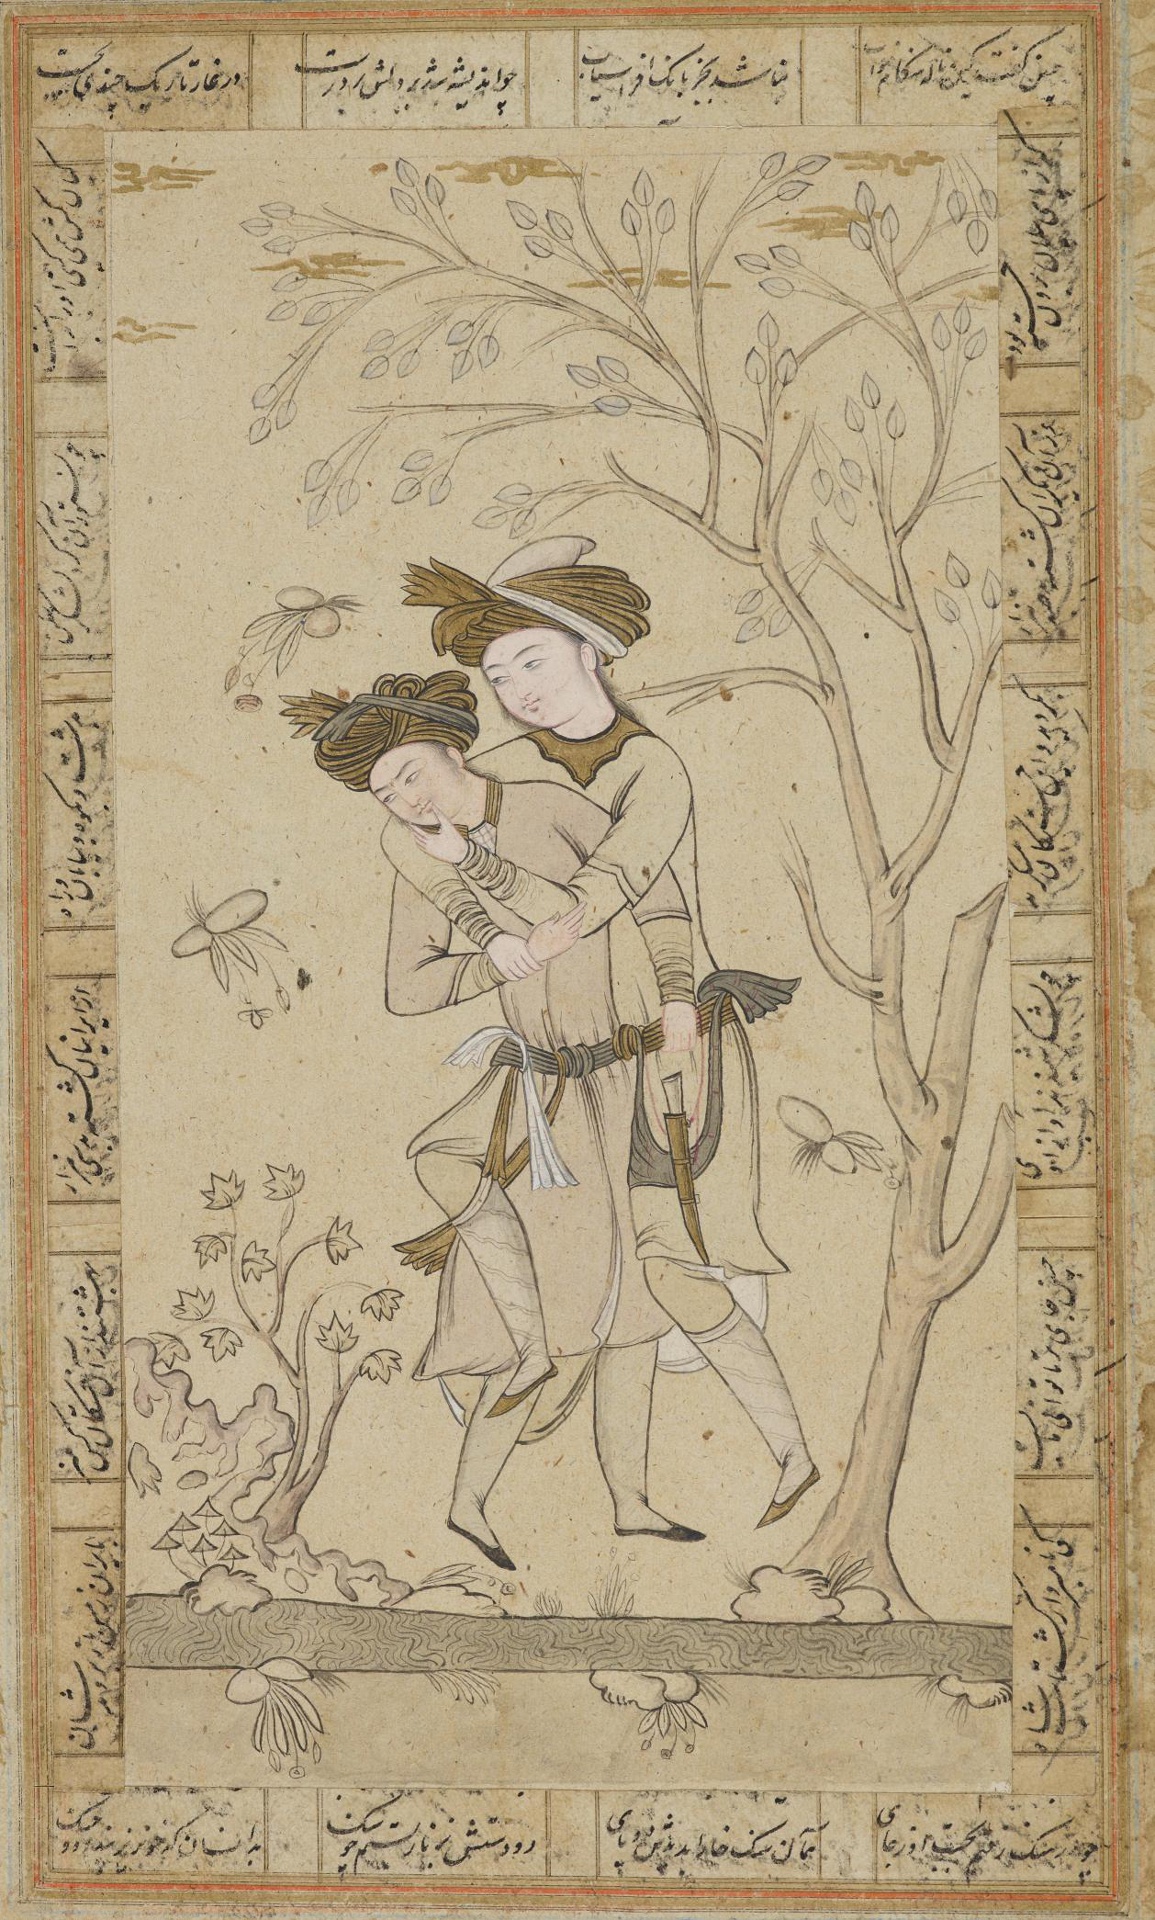 The composition here is the same as in the previous two images, with one youth wrapping his leg around the waste of the other, but the bottle of wine is missing. There are extra landscape features, including a tree and a brook at the boys’ feet. This image is a very light beige wash, except for the turbans, sashes, and collars painted in contrasting gold. Poetry lines form a frame around the image. 